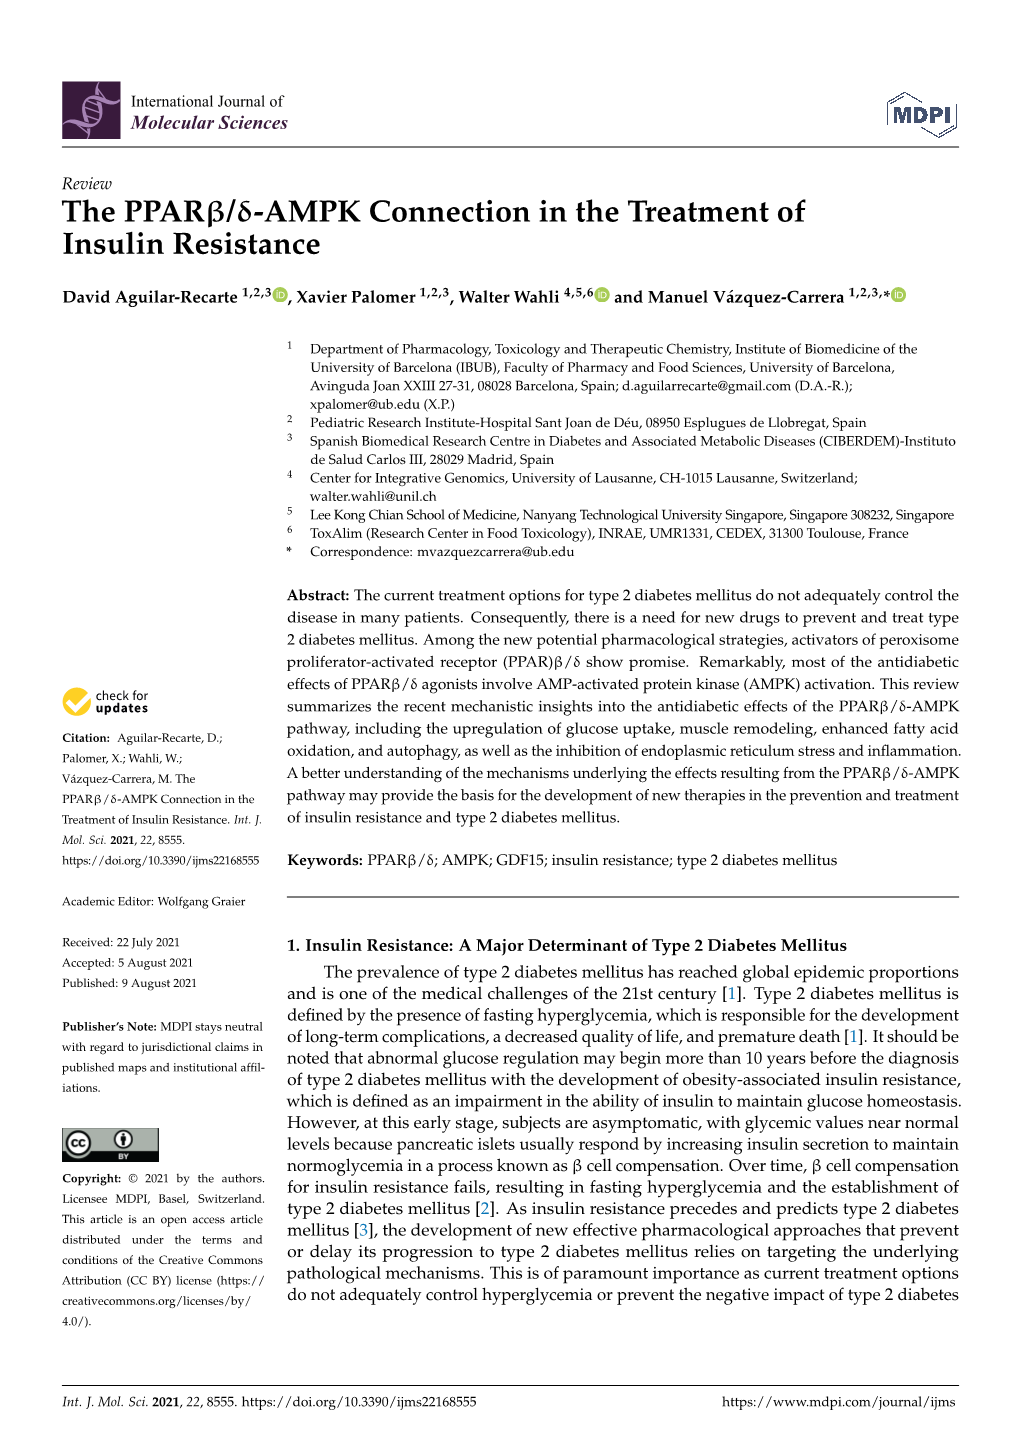 The PPAR/-AMPK Connection in the Treatment of Insulin Resistance